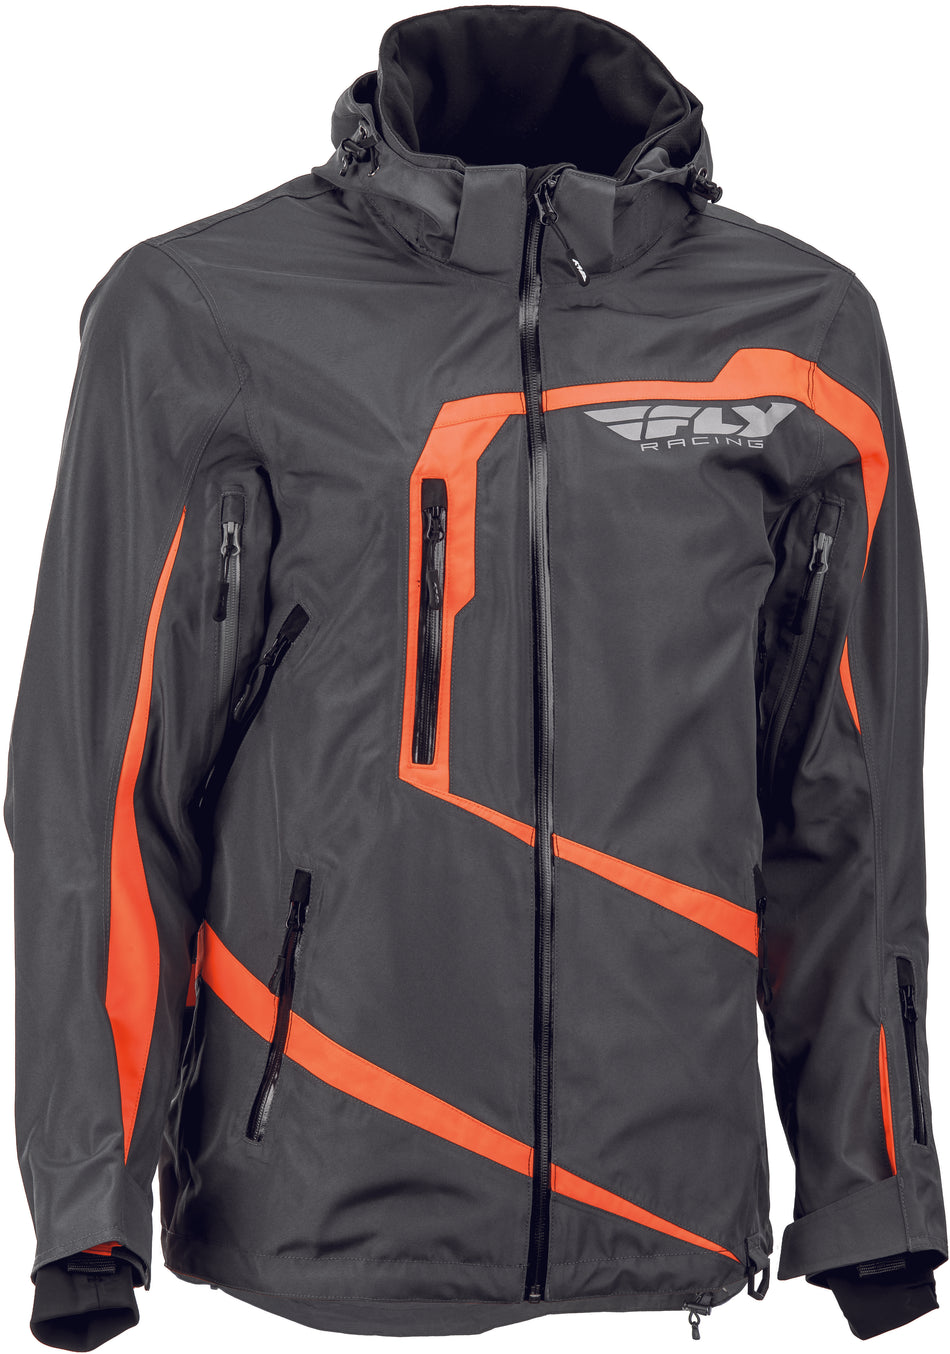 FLY RACING Fly Carbon Jacket Grey/Orange Md 470-4048M